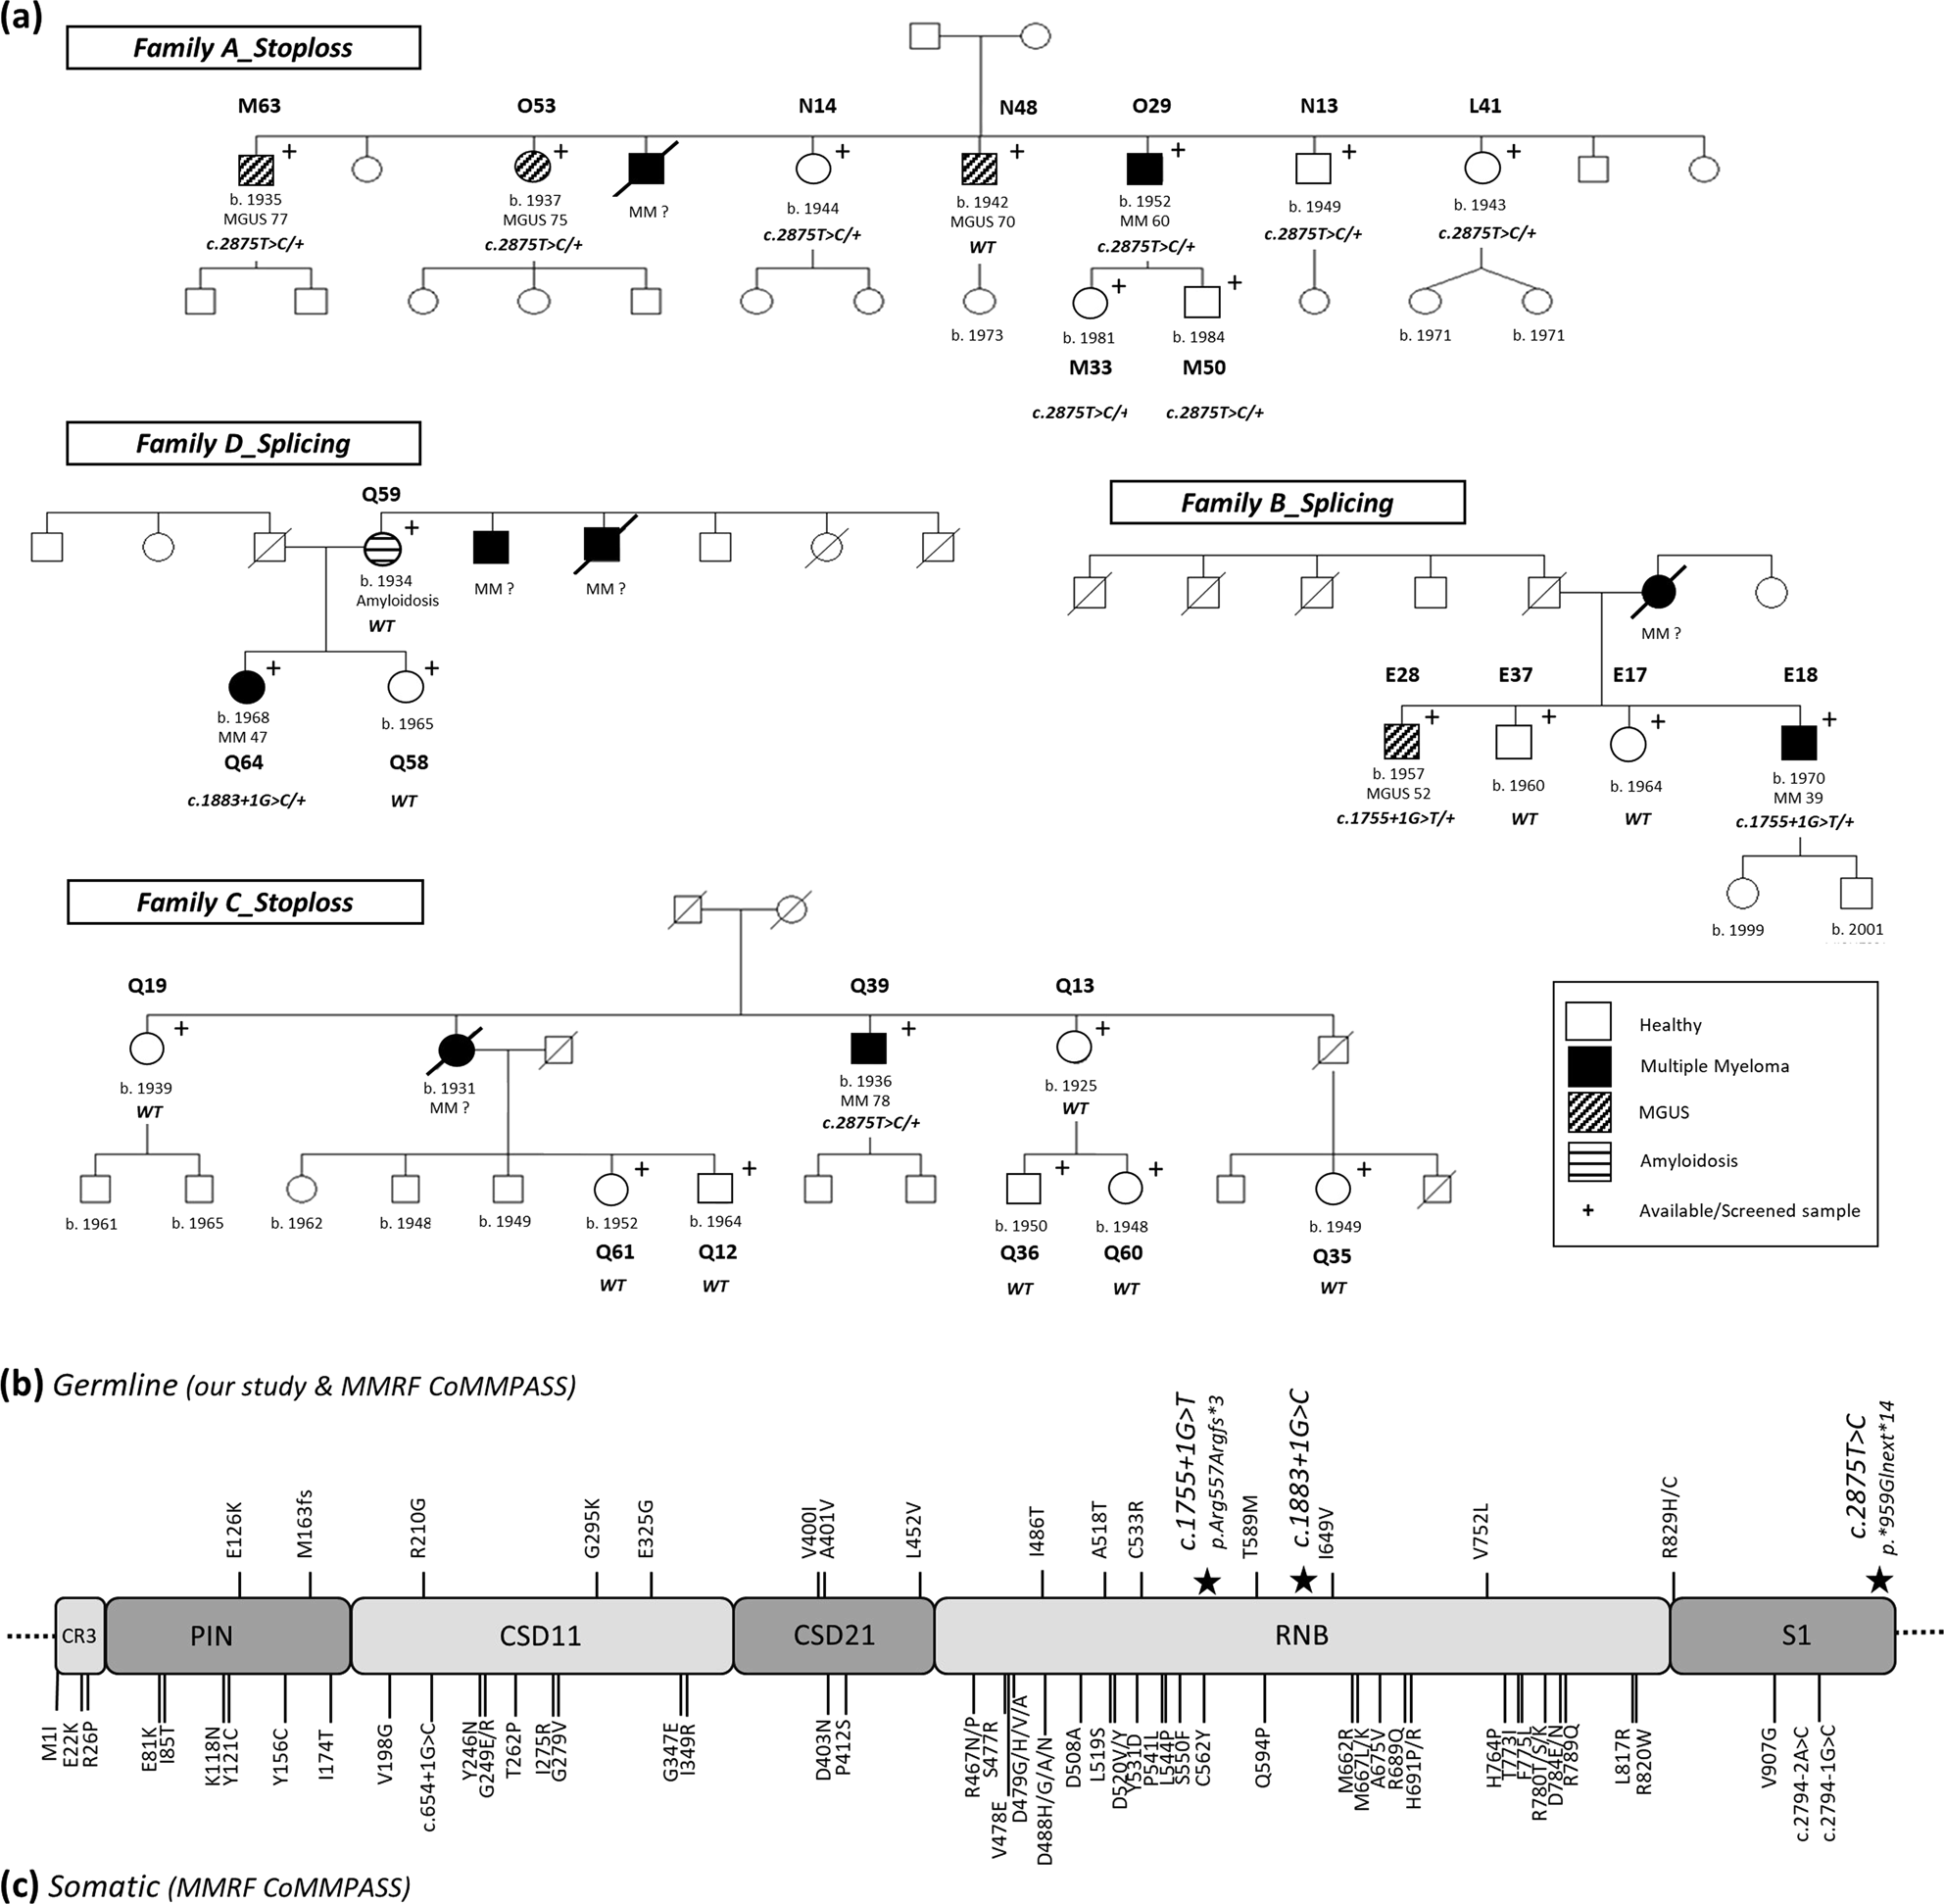 Exome sequencing identifies germline variants in DIS3 in familial multiple  myeloma | Leukemia